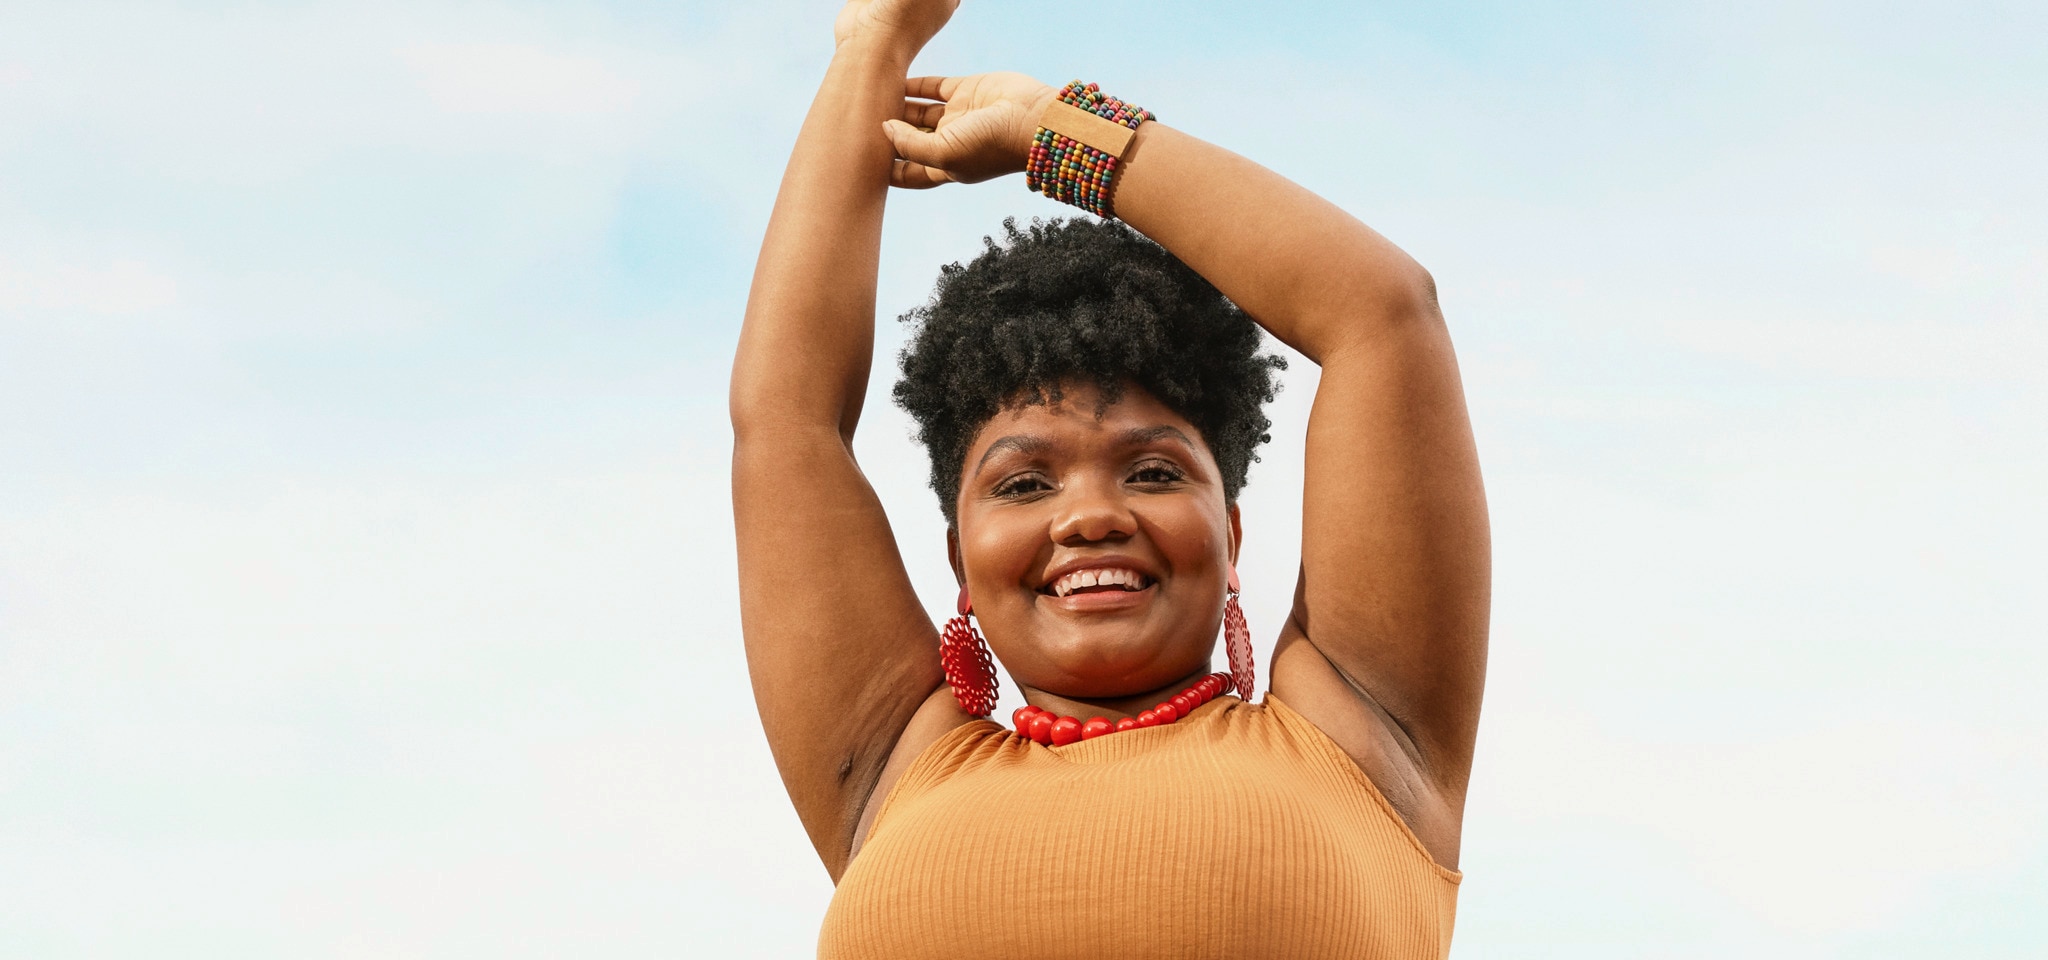 The pressures of underarm perfection: Our findings